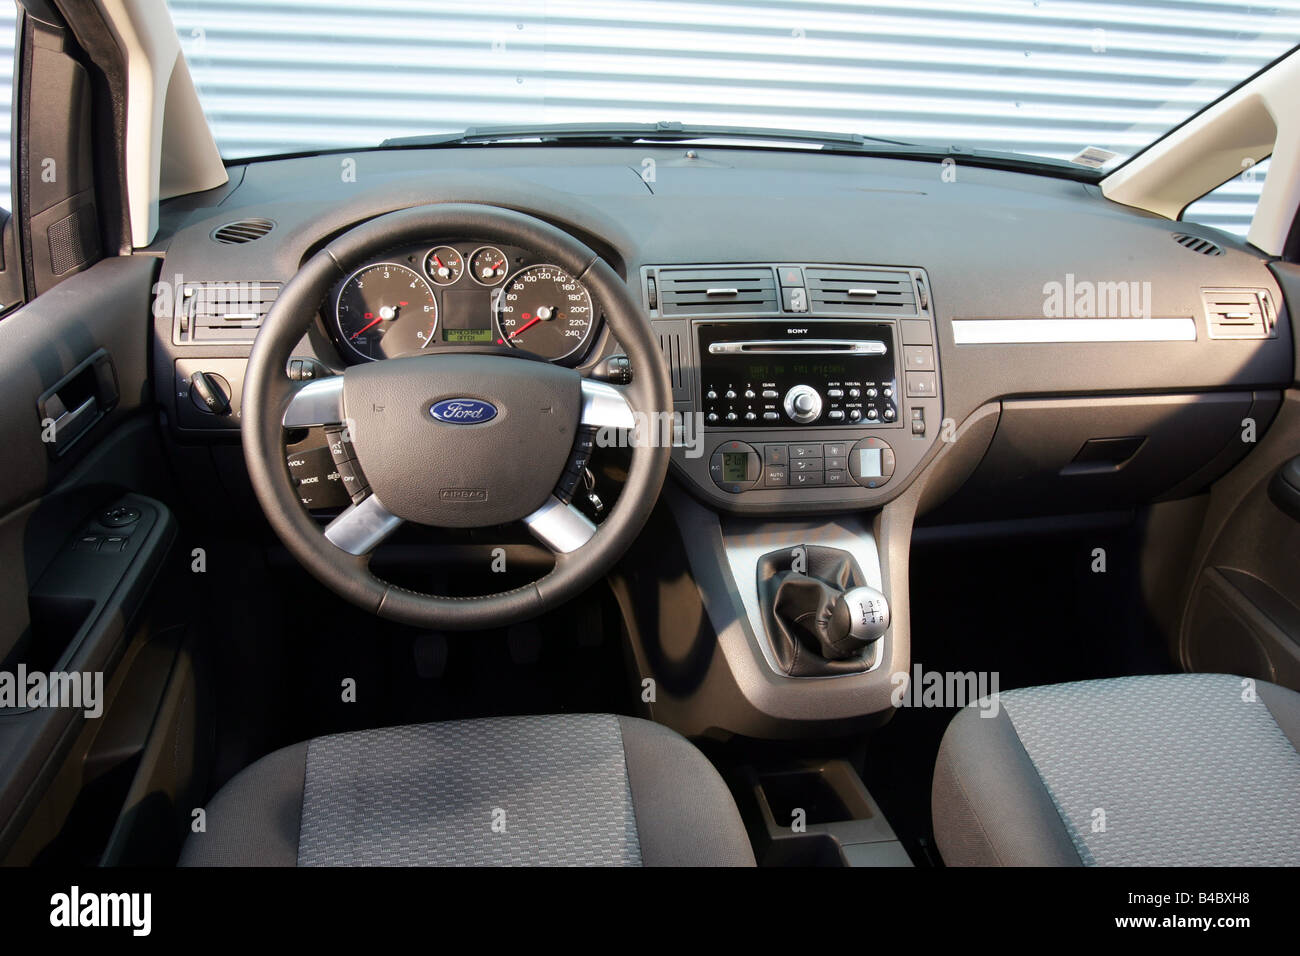 Car Ford Focus C Max Limousine Lower Middle Sized Class Model Year 03 Silver Interior View Interior View Cockpit Tec Stock Photo Alamy